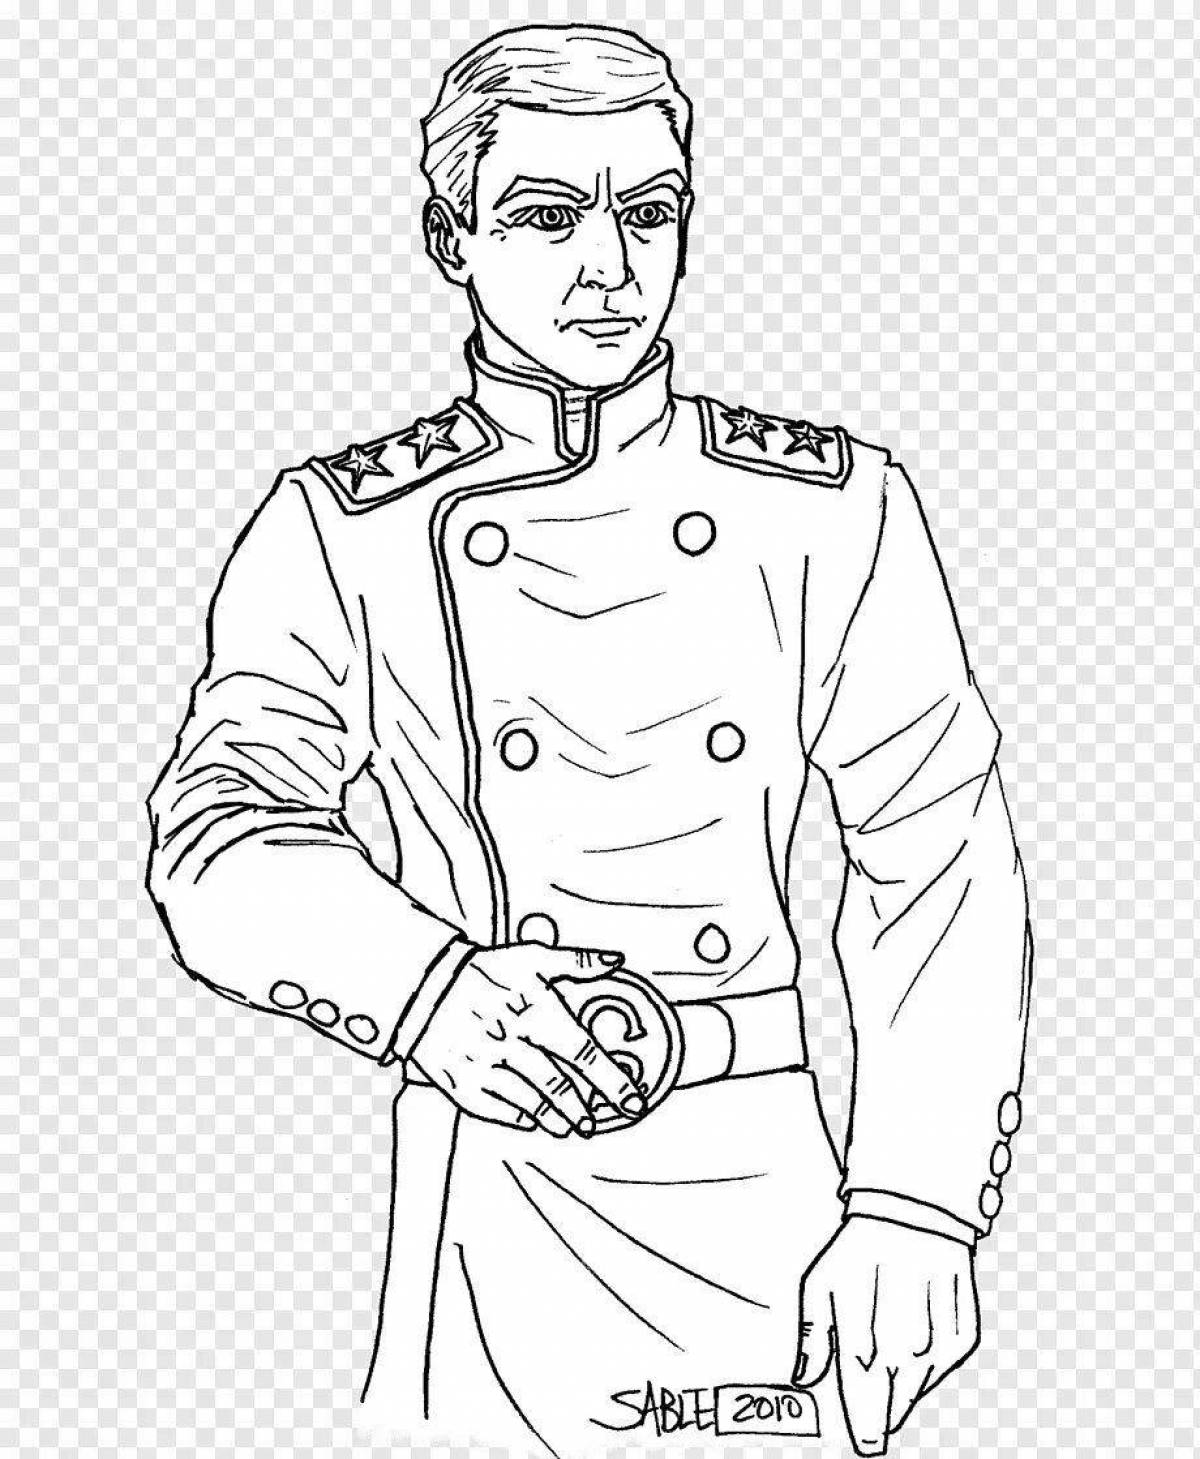 Large military portrait coloring page